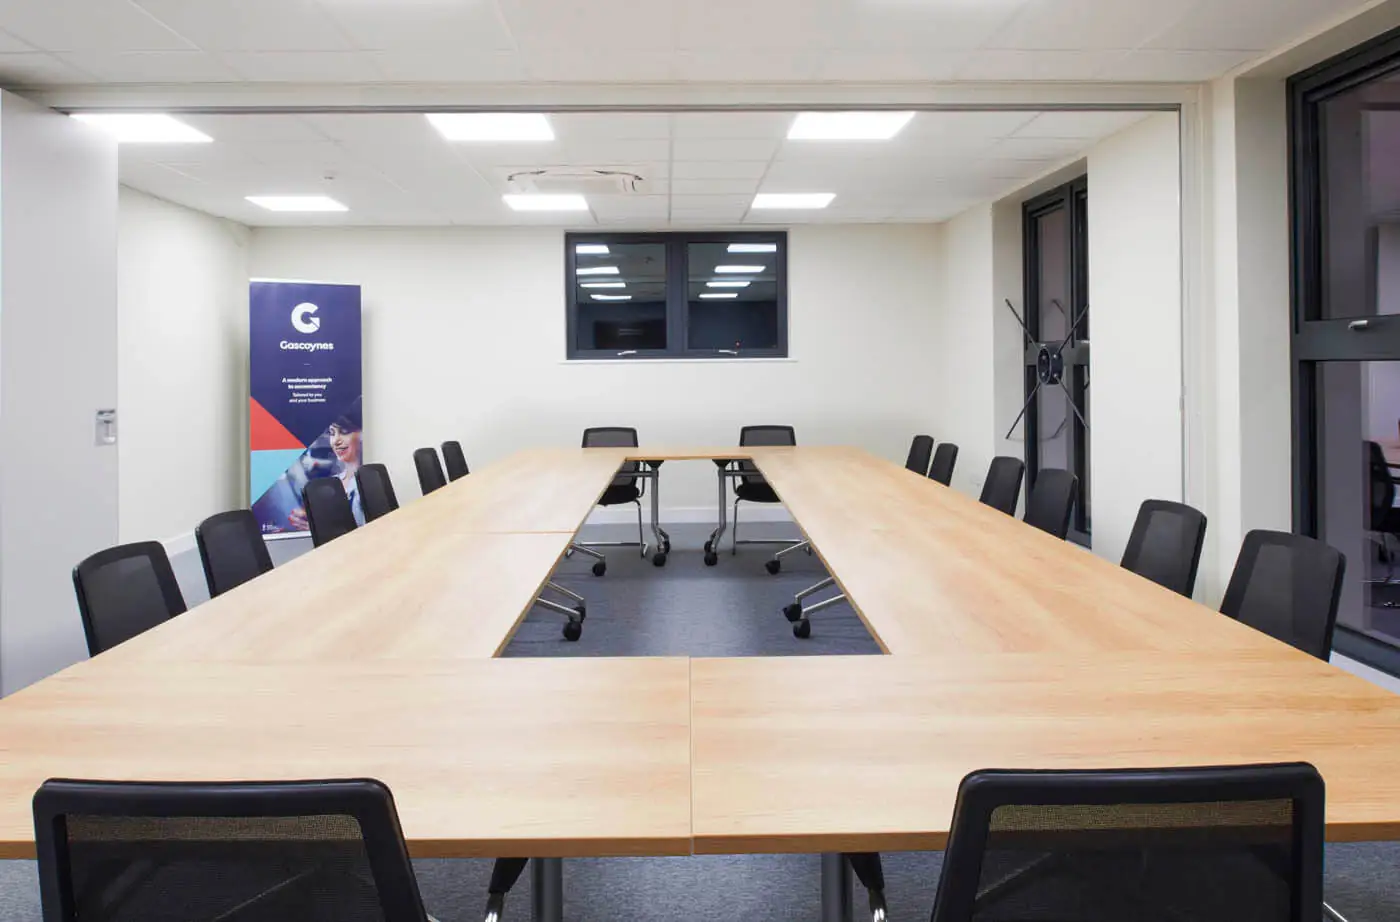 Gascoynes House - New Office Conference Room